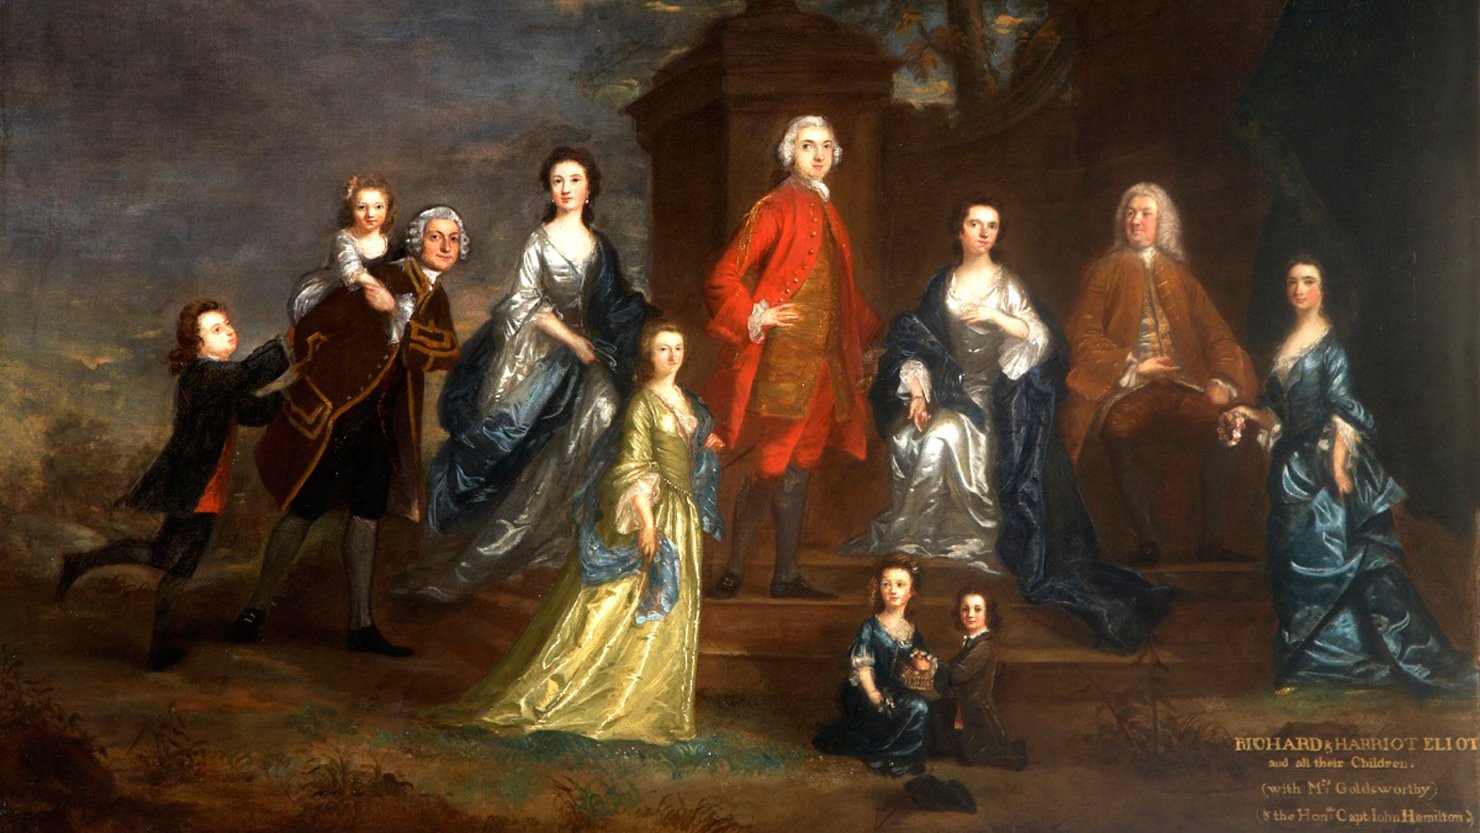 New exhibition will examine the relationship between Reynolds and the Eliot family